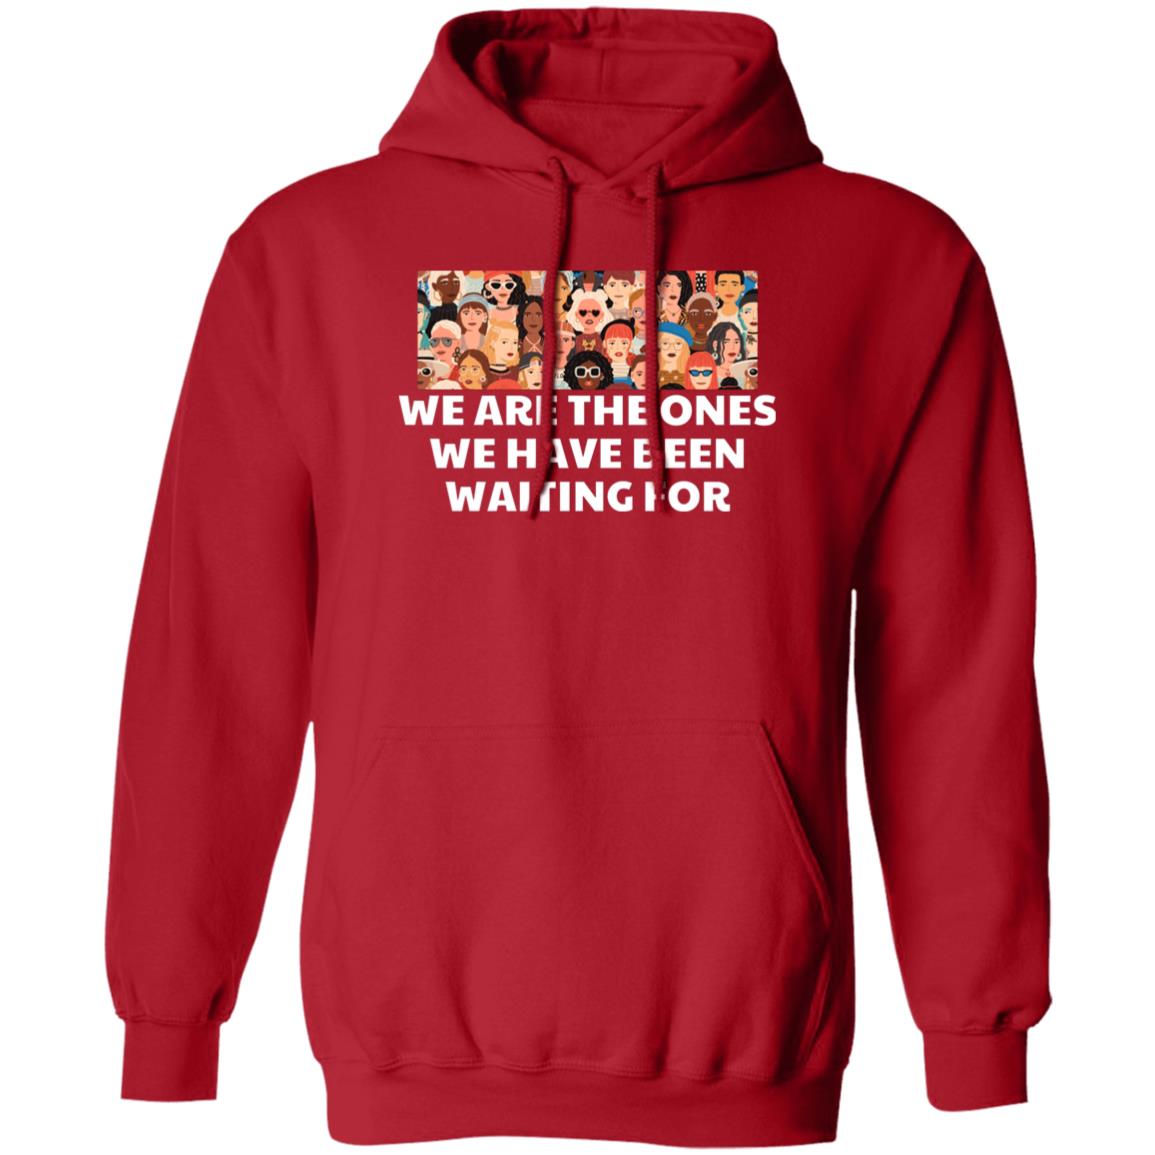 We Are The Ones We Have Been Waiting For Hooded Sweatshirt